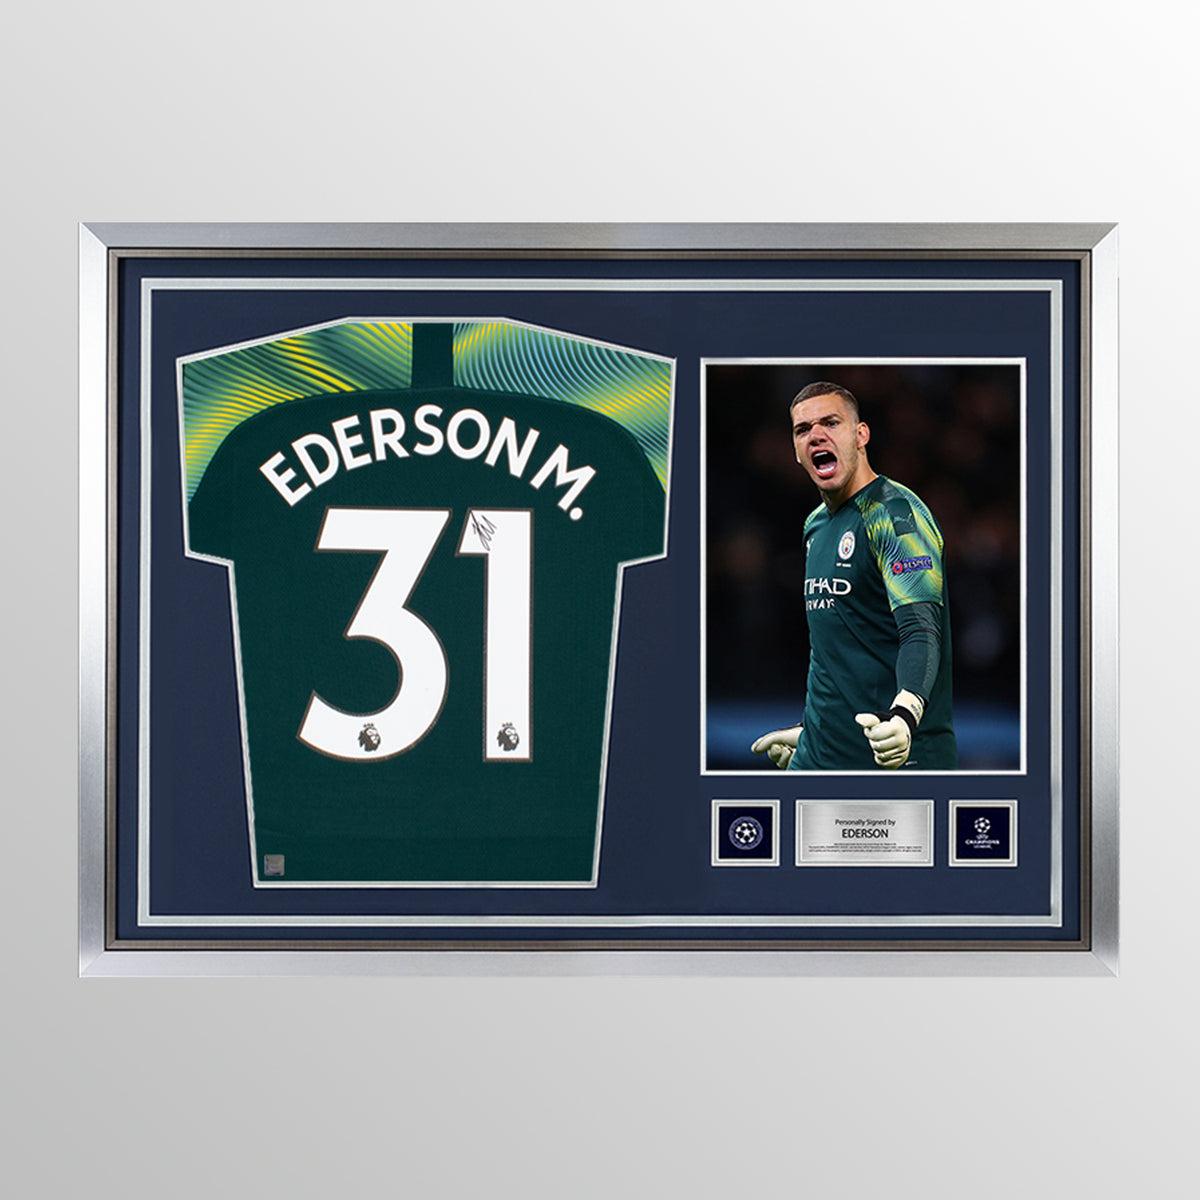 Ederson Official UEFA Champions League Back Signed and Hero Framed Manchester City 2019-20 Home Shirt UEFA Club Competitions Online Store